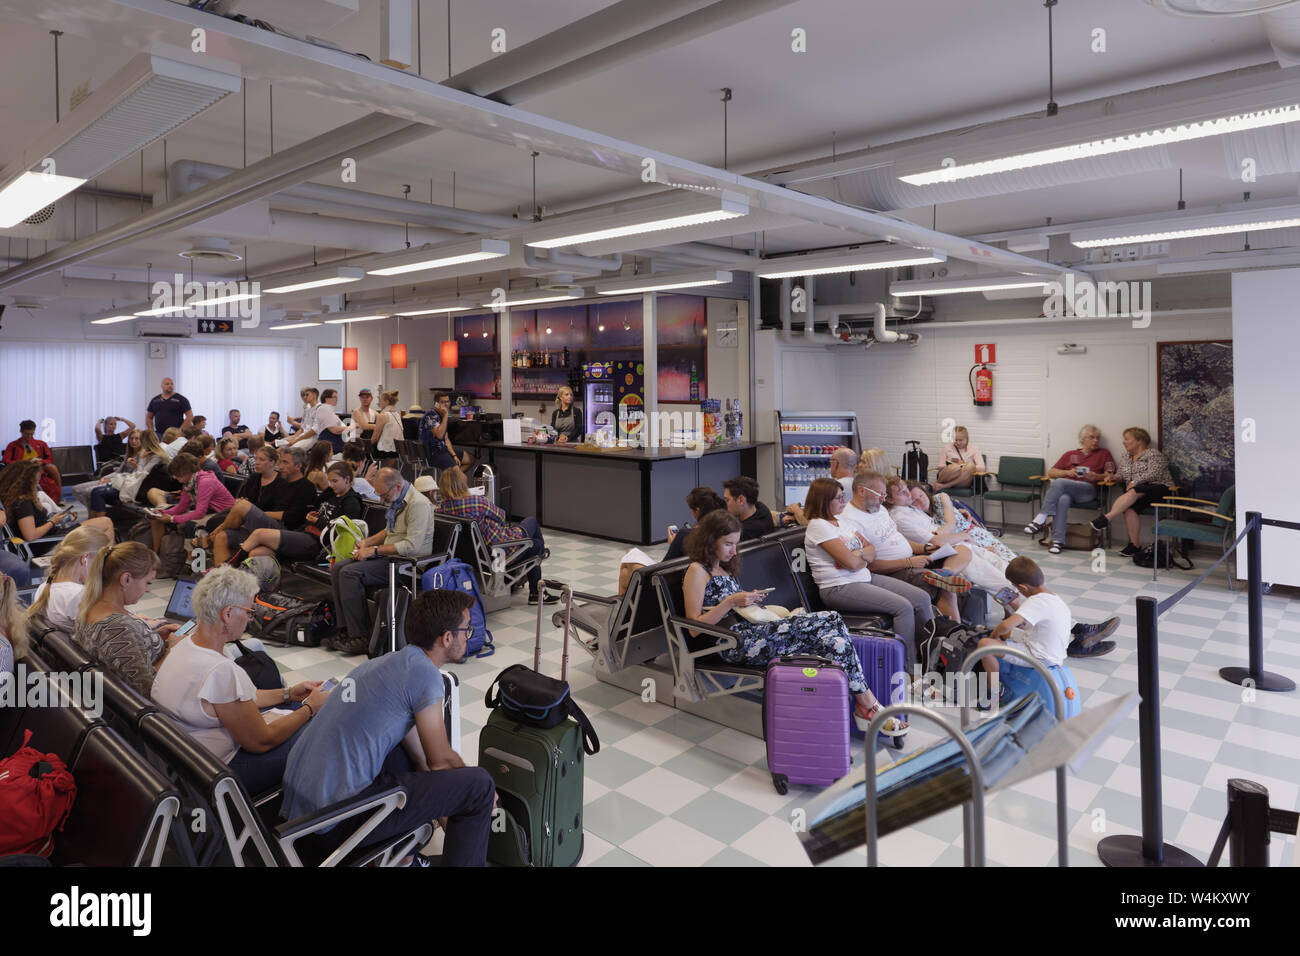 Passengers waiting for their delayed flight in the waiting hall of Lappeenranta airport, Finland Stock Photo